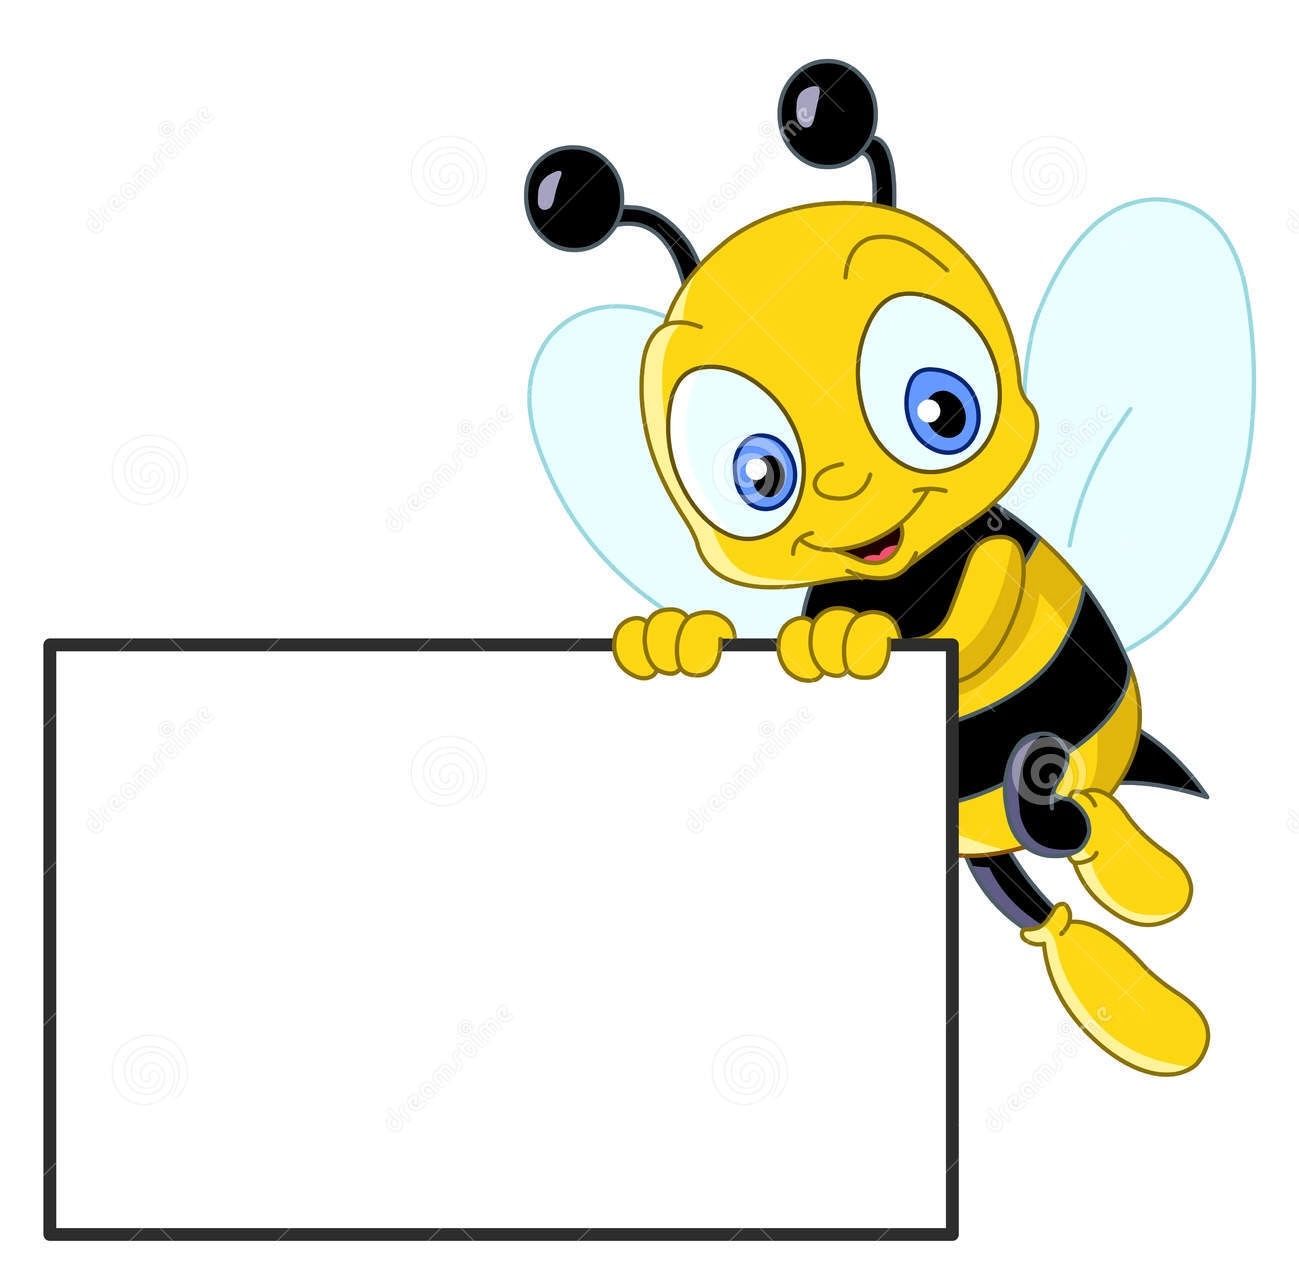 Bees clipart borders.